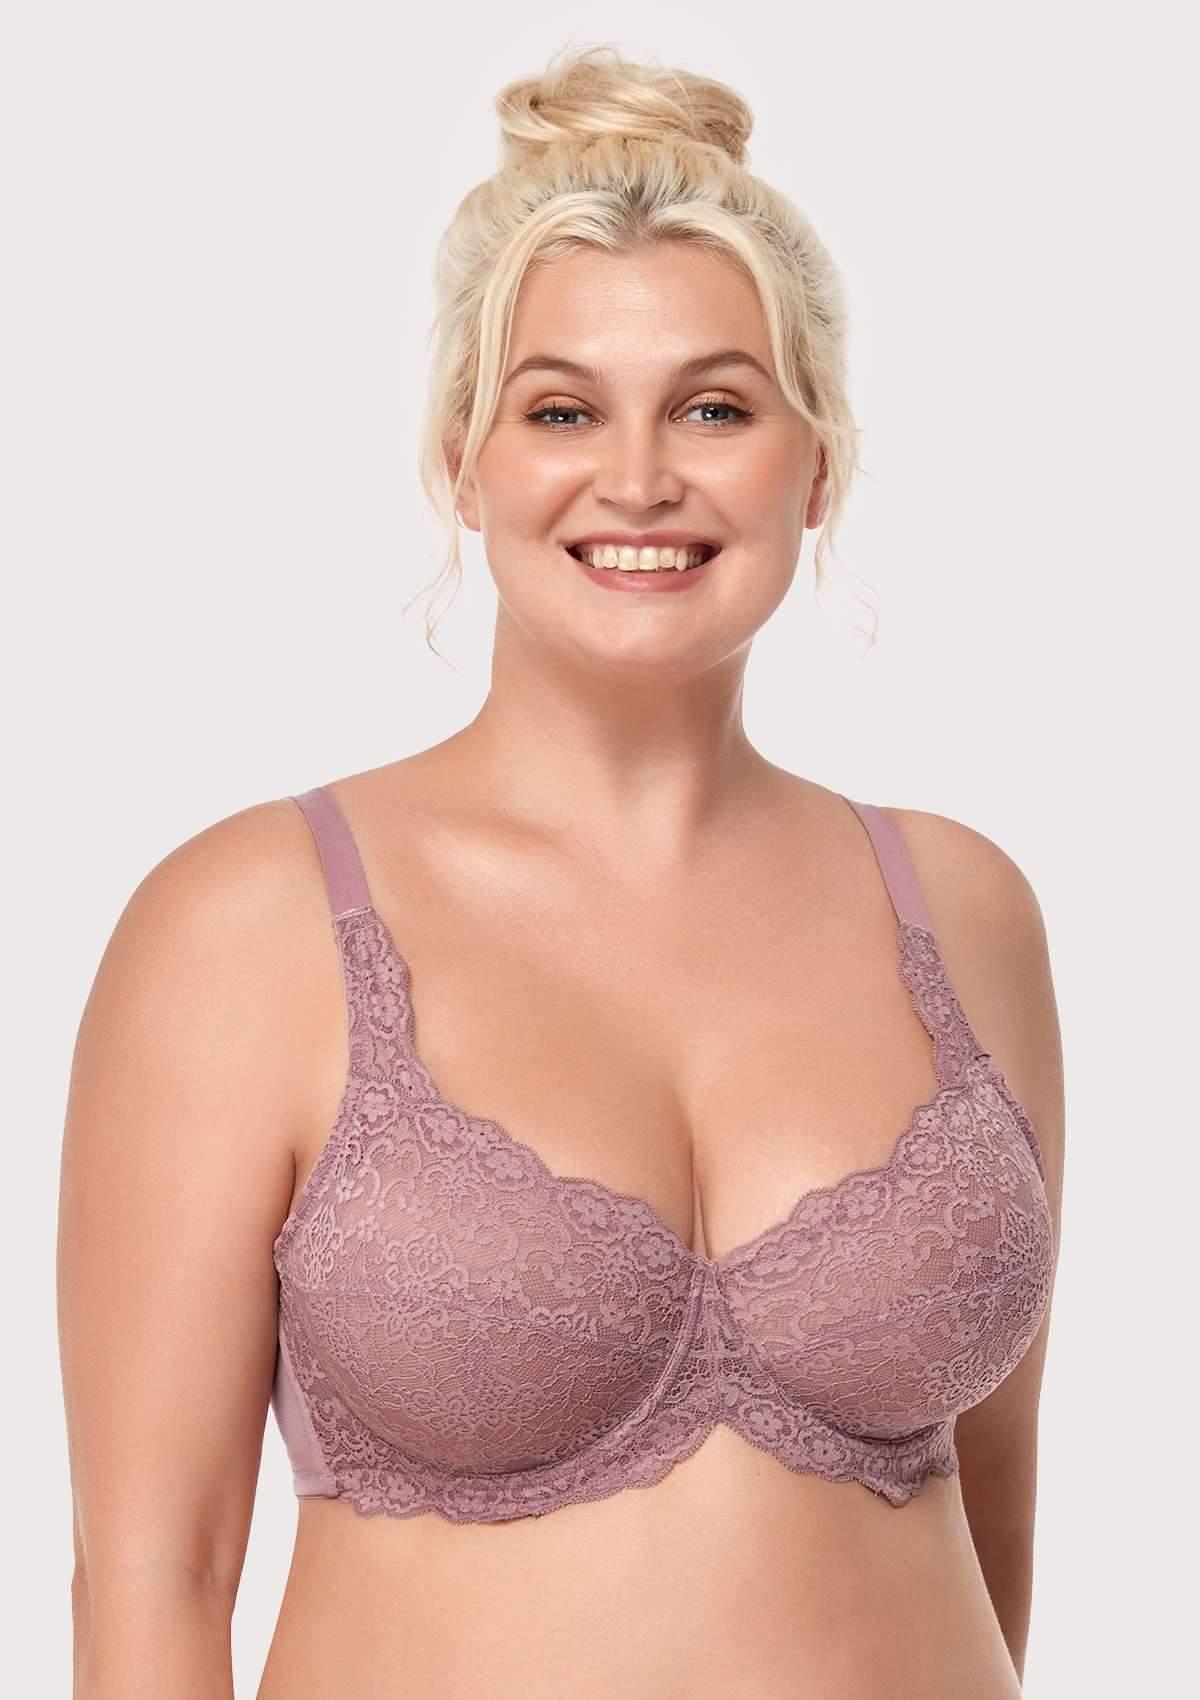 HSIA All-Over Floral Lace Unlined Bra: Minimizer Bra For Heavy Breasts - Purple / 44 / DDD/F